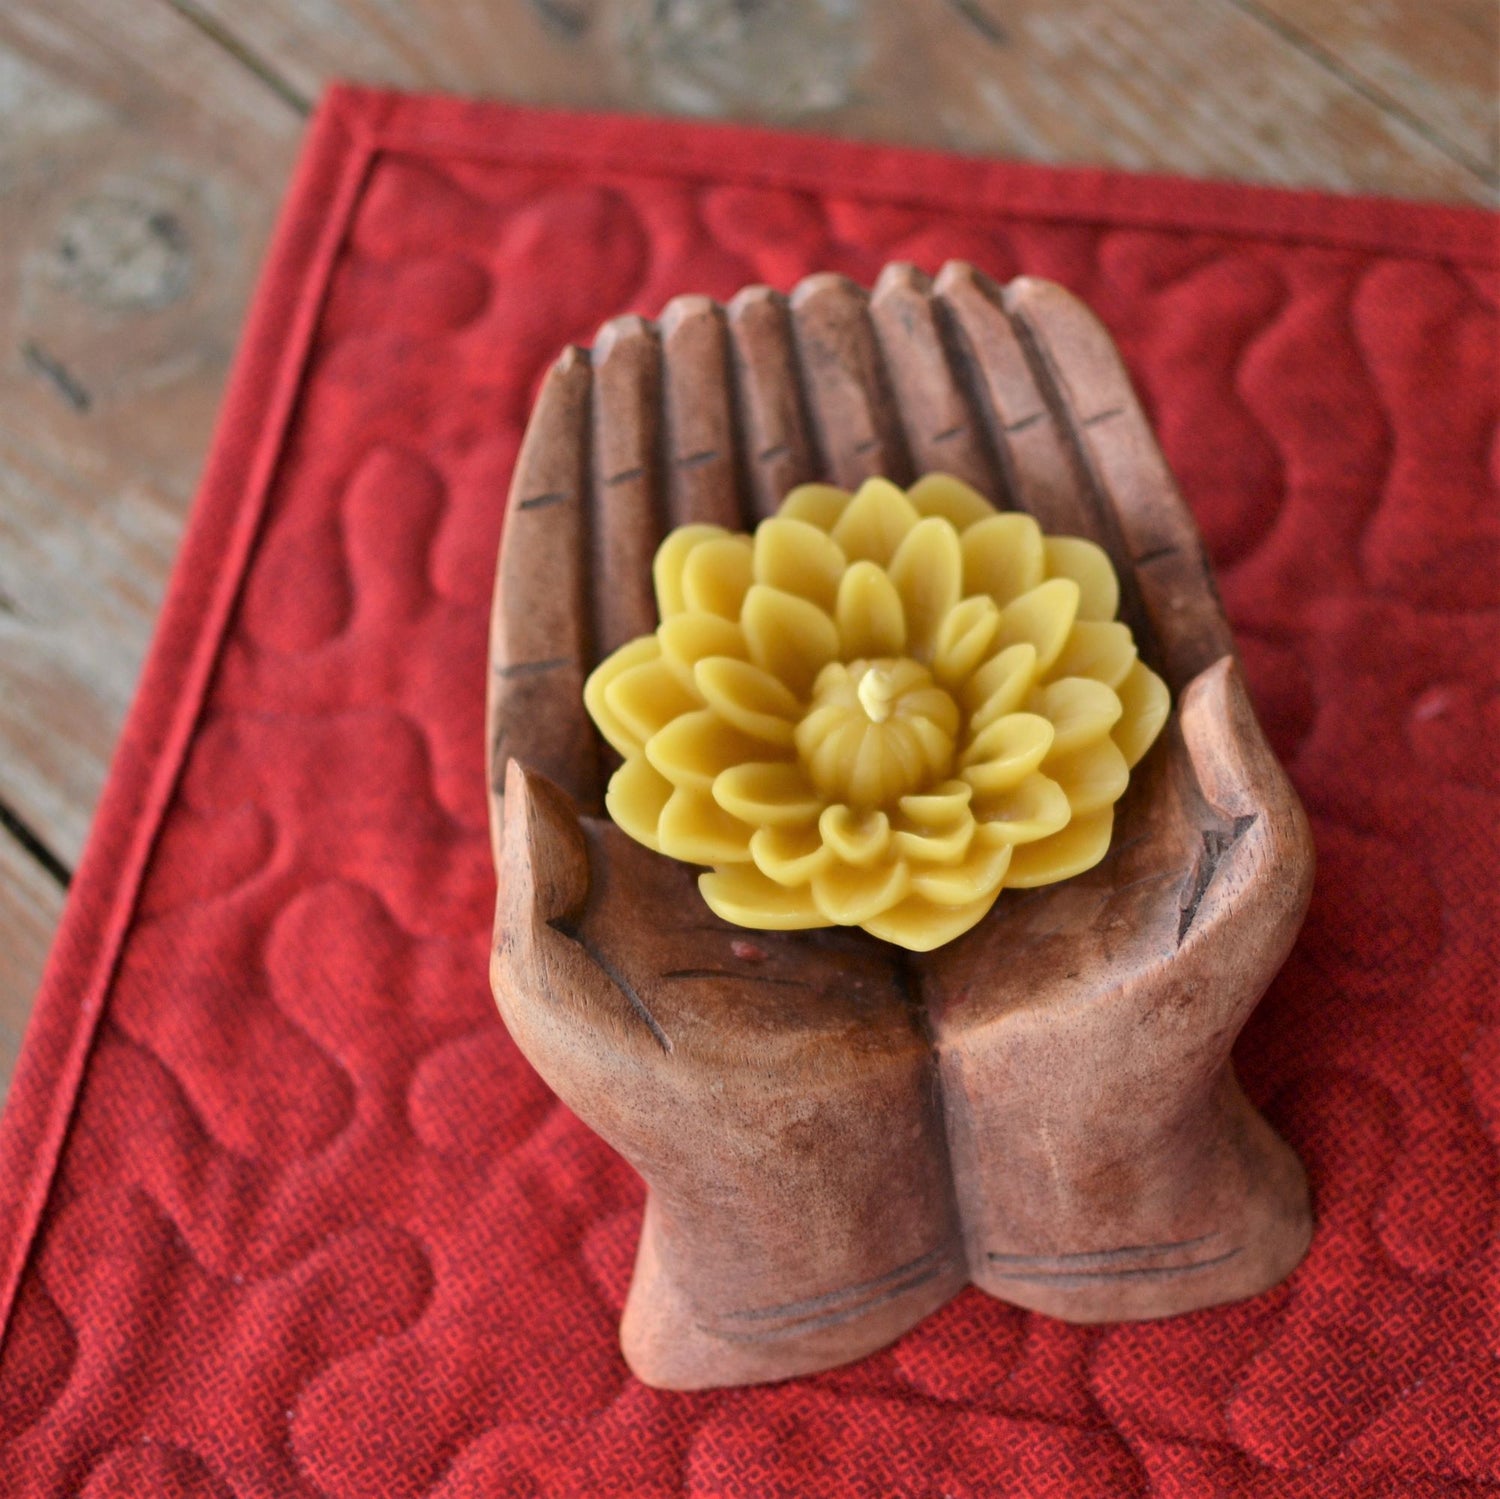 Yellow beeswax dahlia candle sitting in carved wooden giving hands